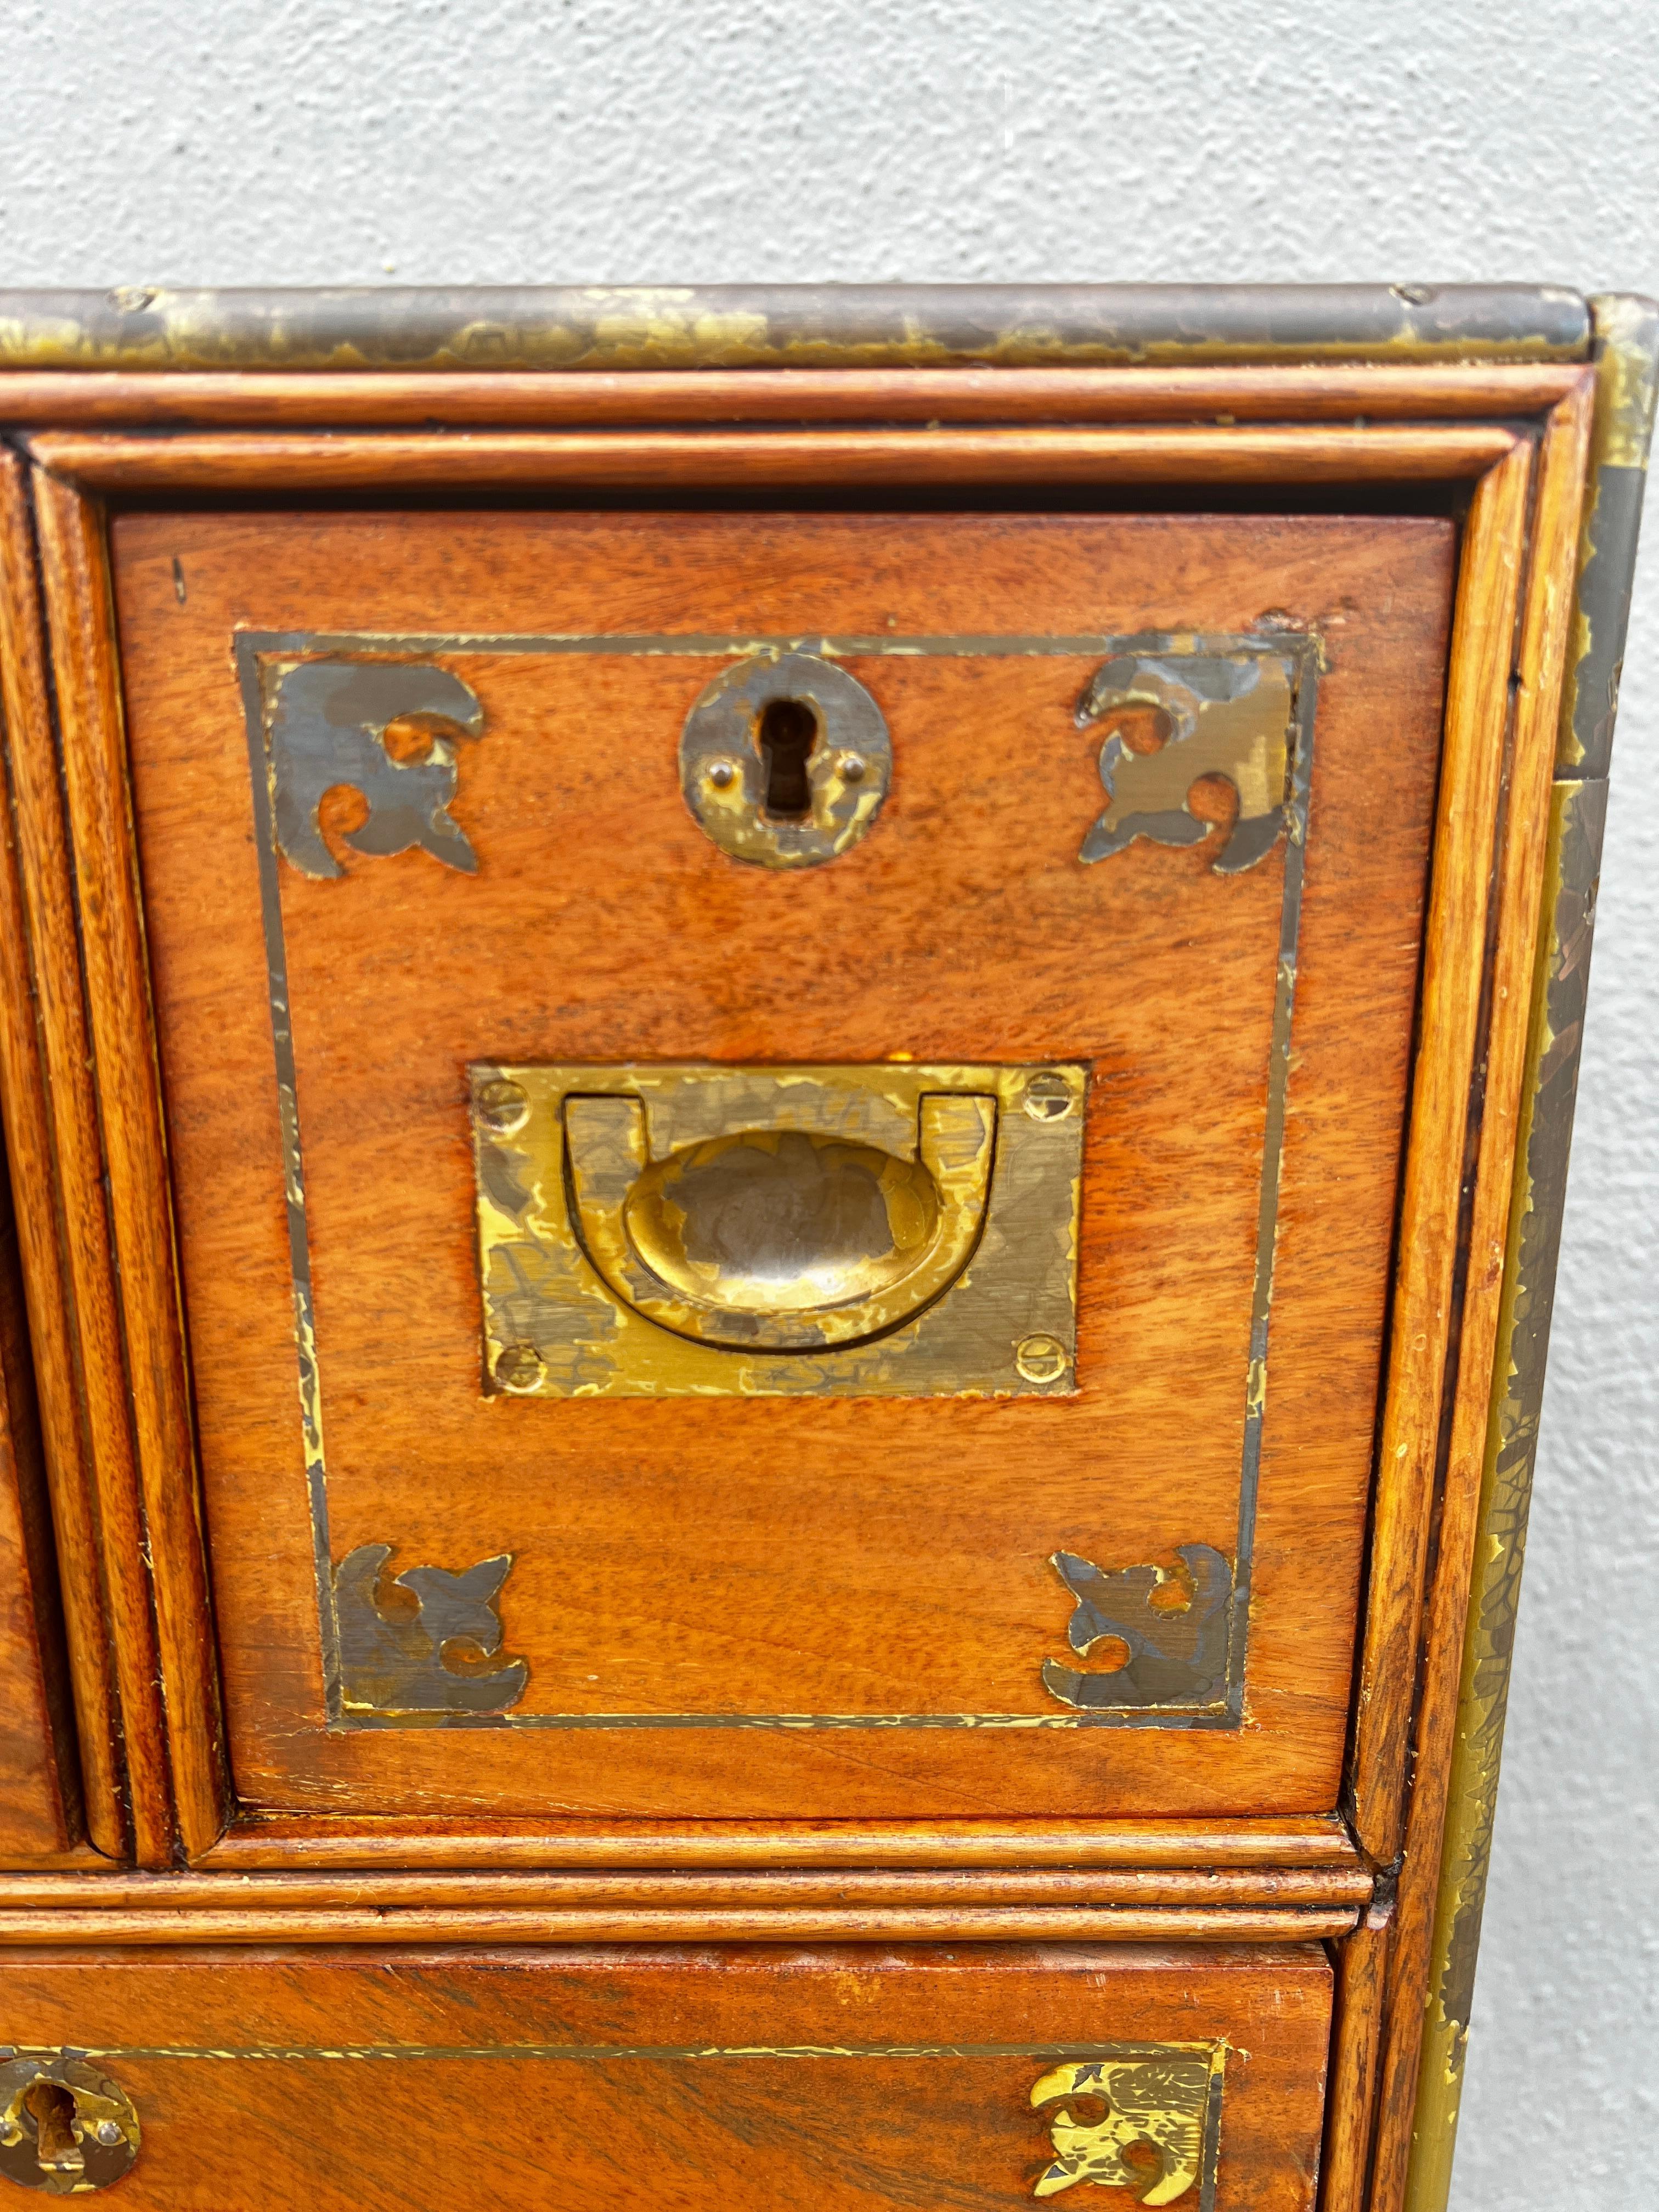 Anglo Raj Regency Campaign Chest with Desk Trimmed in Brass Banding Accents 1811 For Sale 10